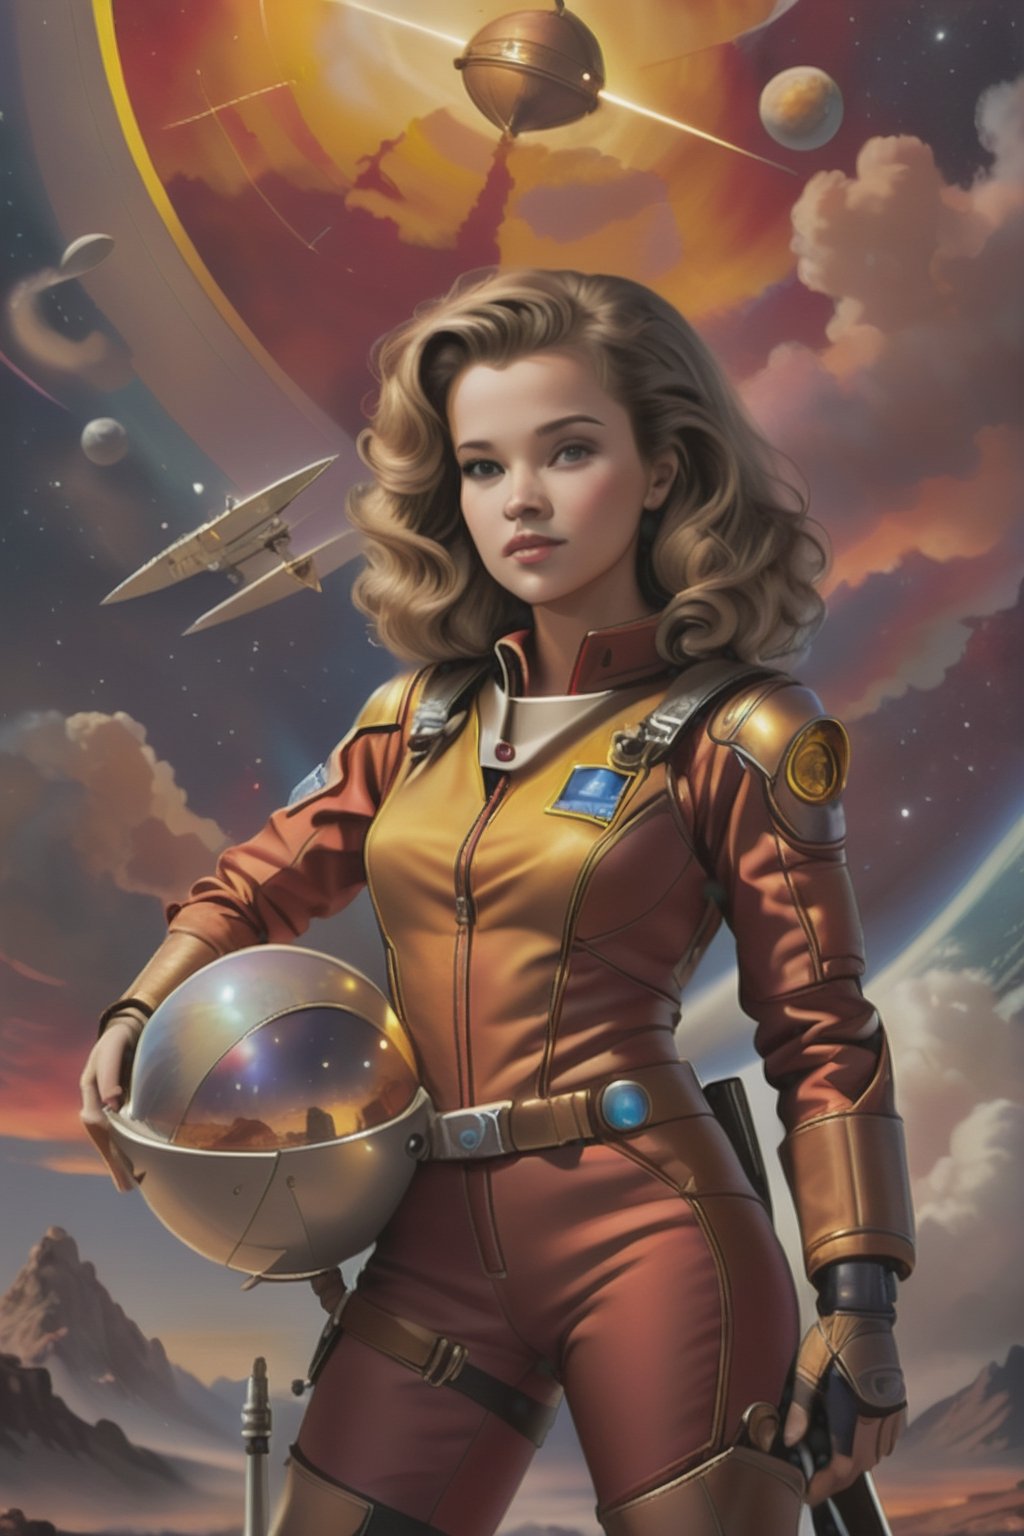 {{portrait of 25 year old Melody Anderson dressed a space explorer}}, brown curly hair, heroic pose, {{holding space spear}}, rocket ships, {{red and yellow clouded sky background}},arcane